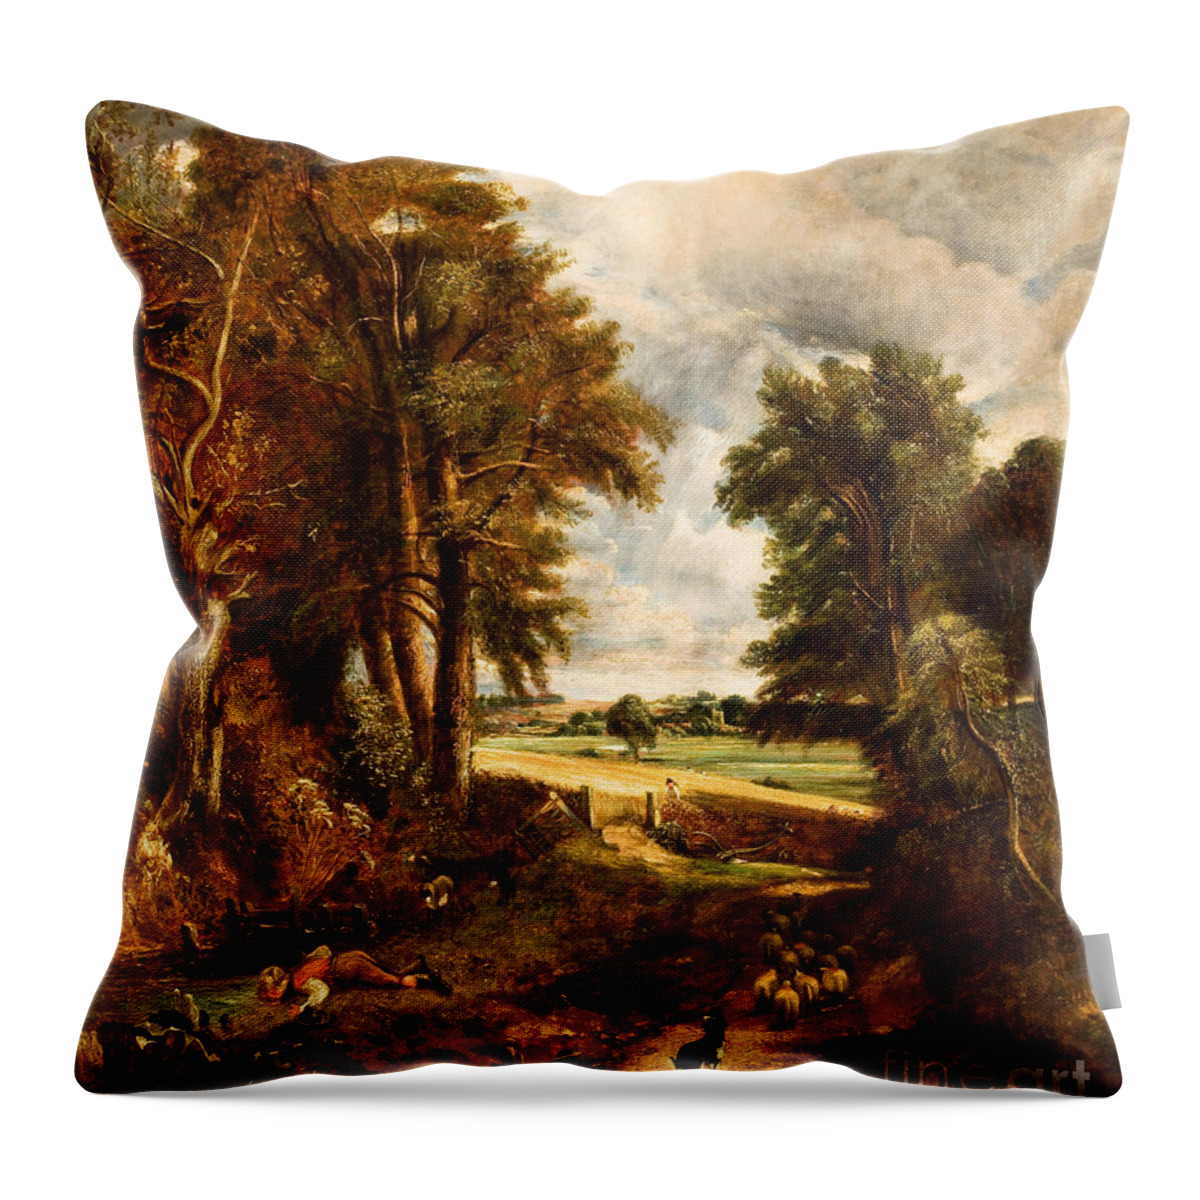 Extensive Landscape With Boy Drinking Water From A Stream Throw Pillow featuring the painting Extensive Landscape with Boy Drinking Water from a Stream by Celestial Images